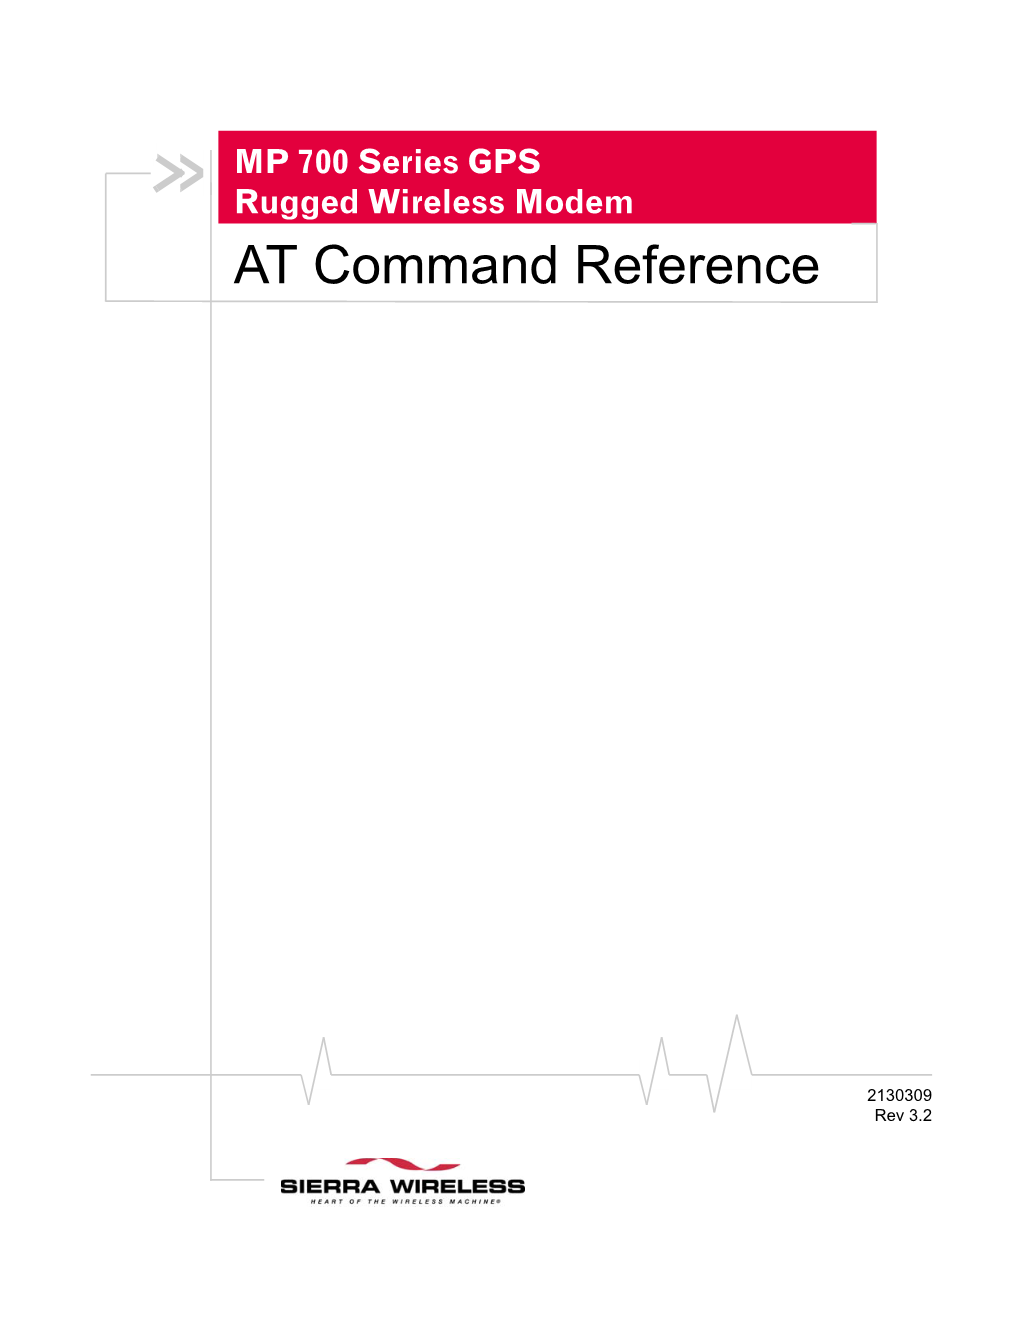 AT Command Reference